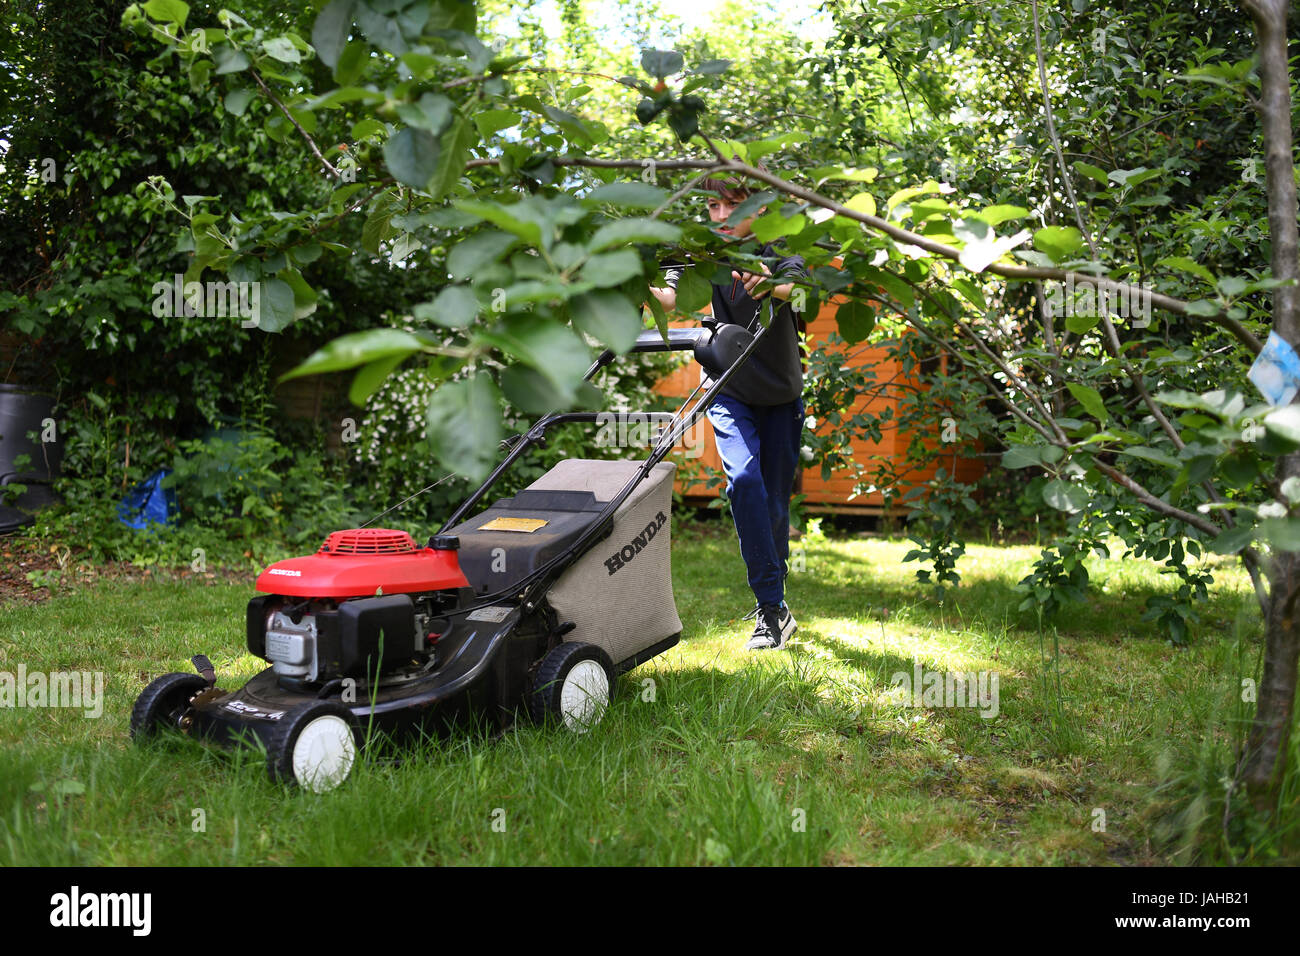 A young Boy cuts the grass in the garden as part of his chores for pocket money Stock Photo